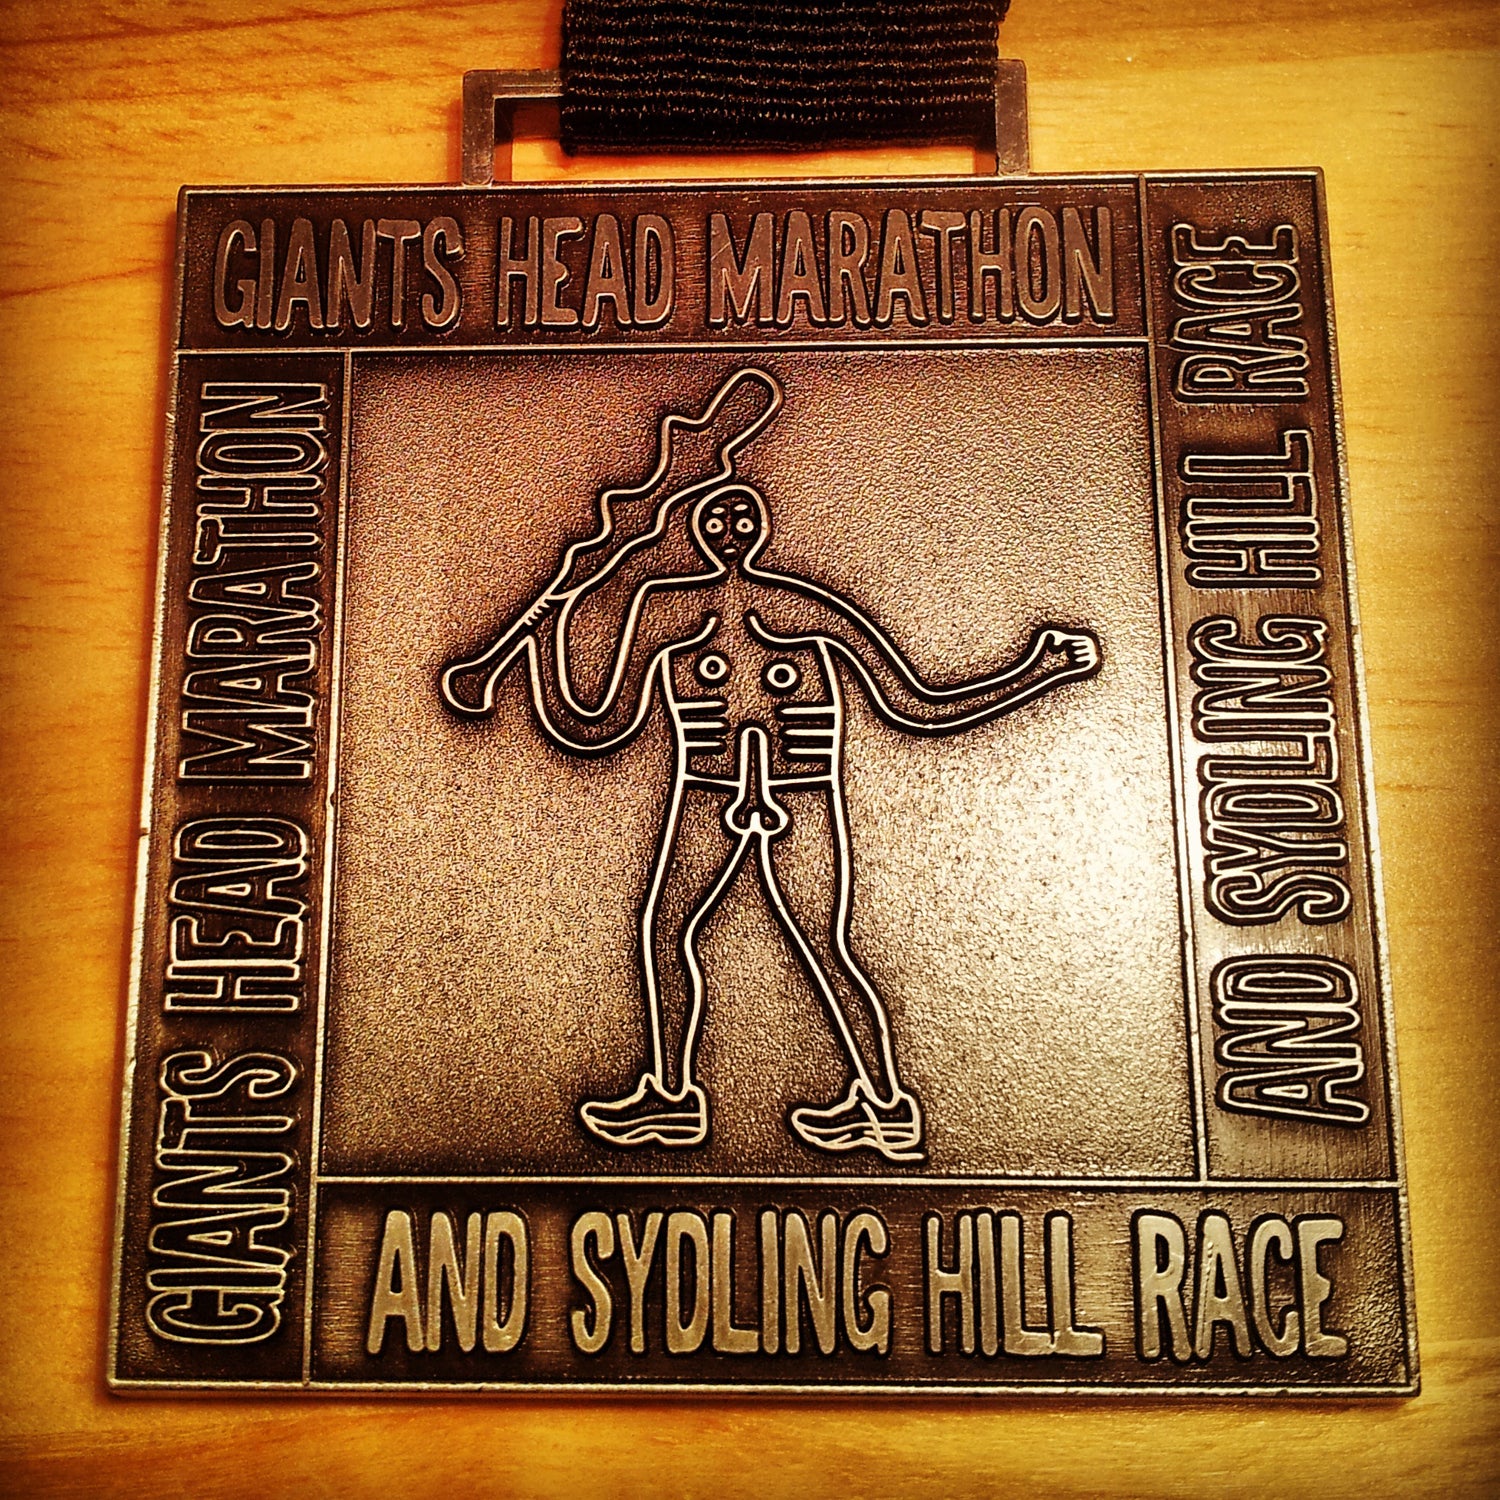 Williams: Speaking of male genitalia, the next medal was fabulous enough to make me sign up for the (slightly long) marathon despite it’s hellish elevation profile. The Giant’s Head Marathon, in Dorset, takes place in the beautiful English countryside, including the historical Cerne Abbas Giant, a giant chalk drawing on a hillside. The Cerne Abbas Giant features prominently on the medal, including his prominent member. It’s also a weighty piece of hardware and a challenging day out. Bonus: At (roughly) 20 miles, there is a “Love Station,” which features tray bakes, cake, sandwiches, cider, and flavored vodka.Fun fact: The weekend was so filled with innuendo that I genuinely asked for the “spicy penis sauce” instead of the spicy peanut sauce the following day in a restaurant.